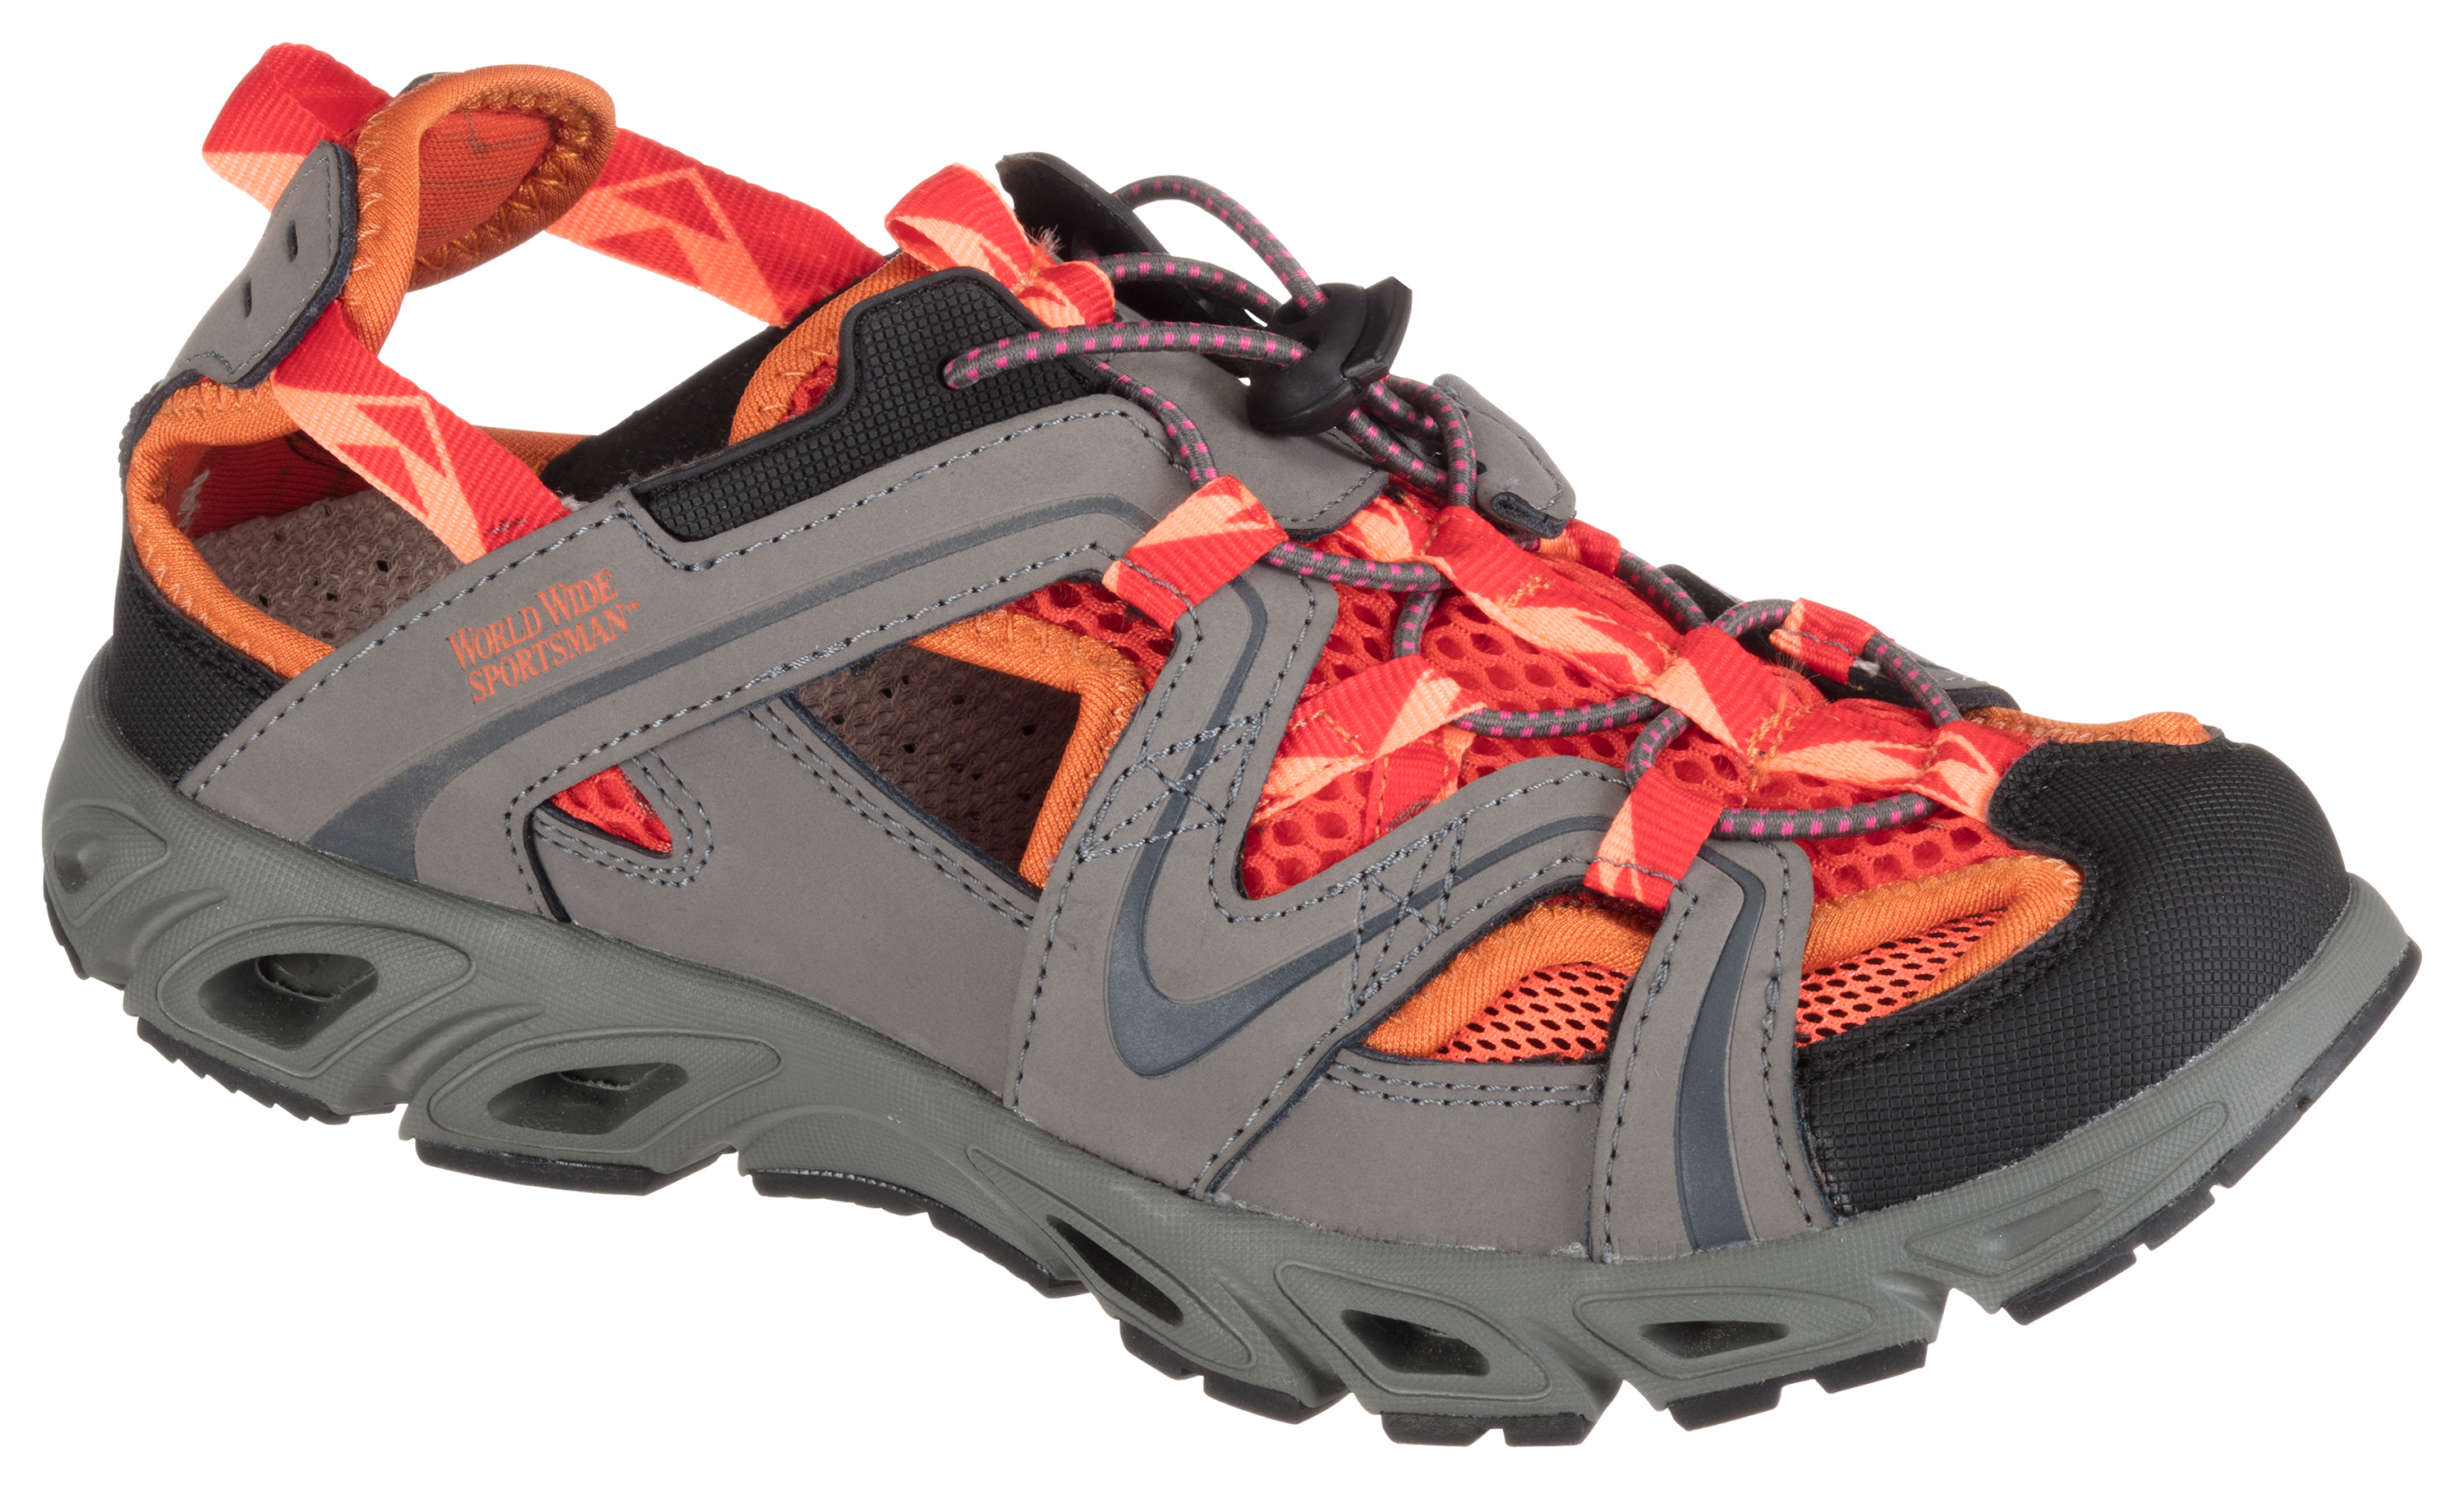 World Wide Sportsman Cimarron Water Shoes for Ladies